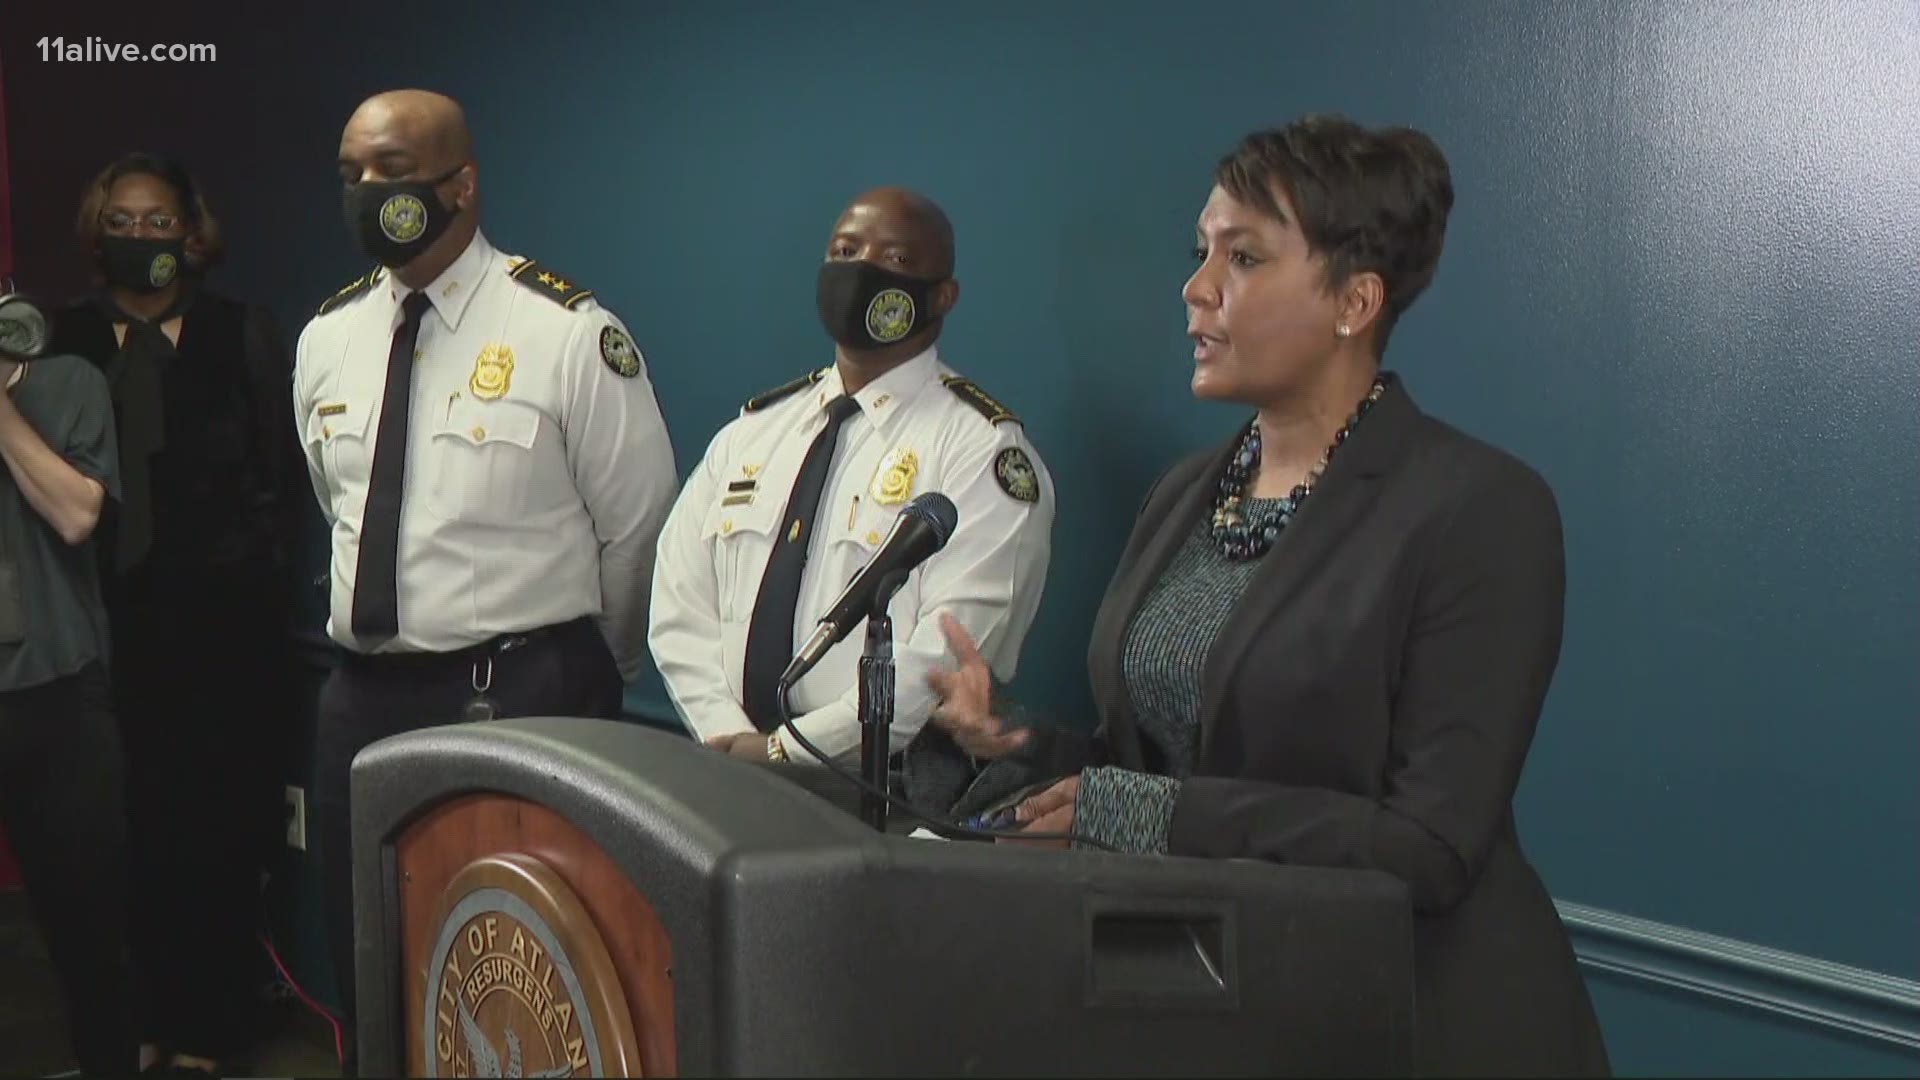 Atlanta Mayor Keisha Lance Bottoms spoke about Anti-Asian violence in a press conference about the spa killings that took 8 lives.